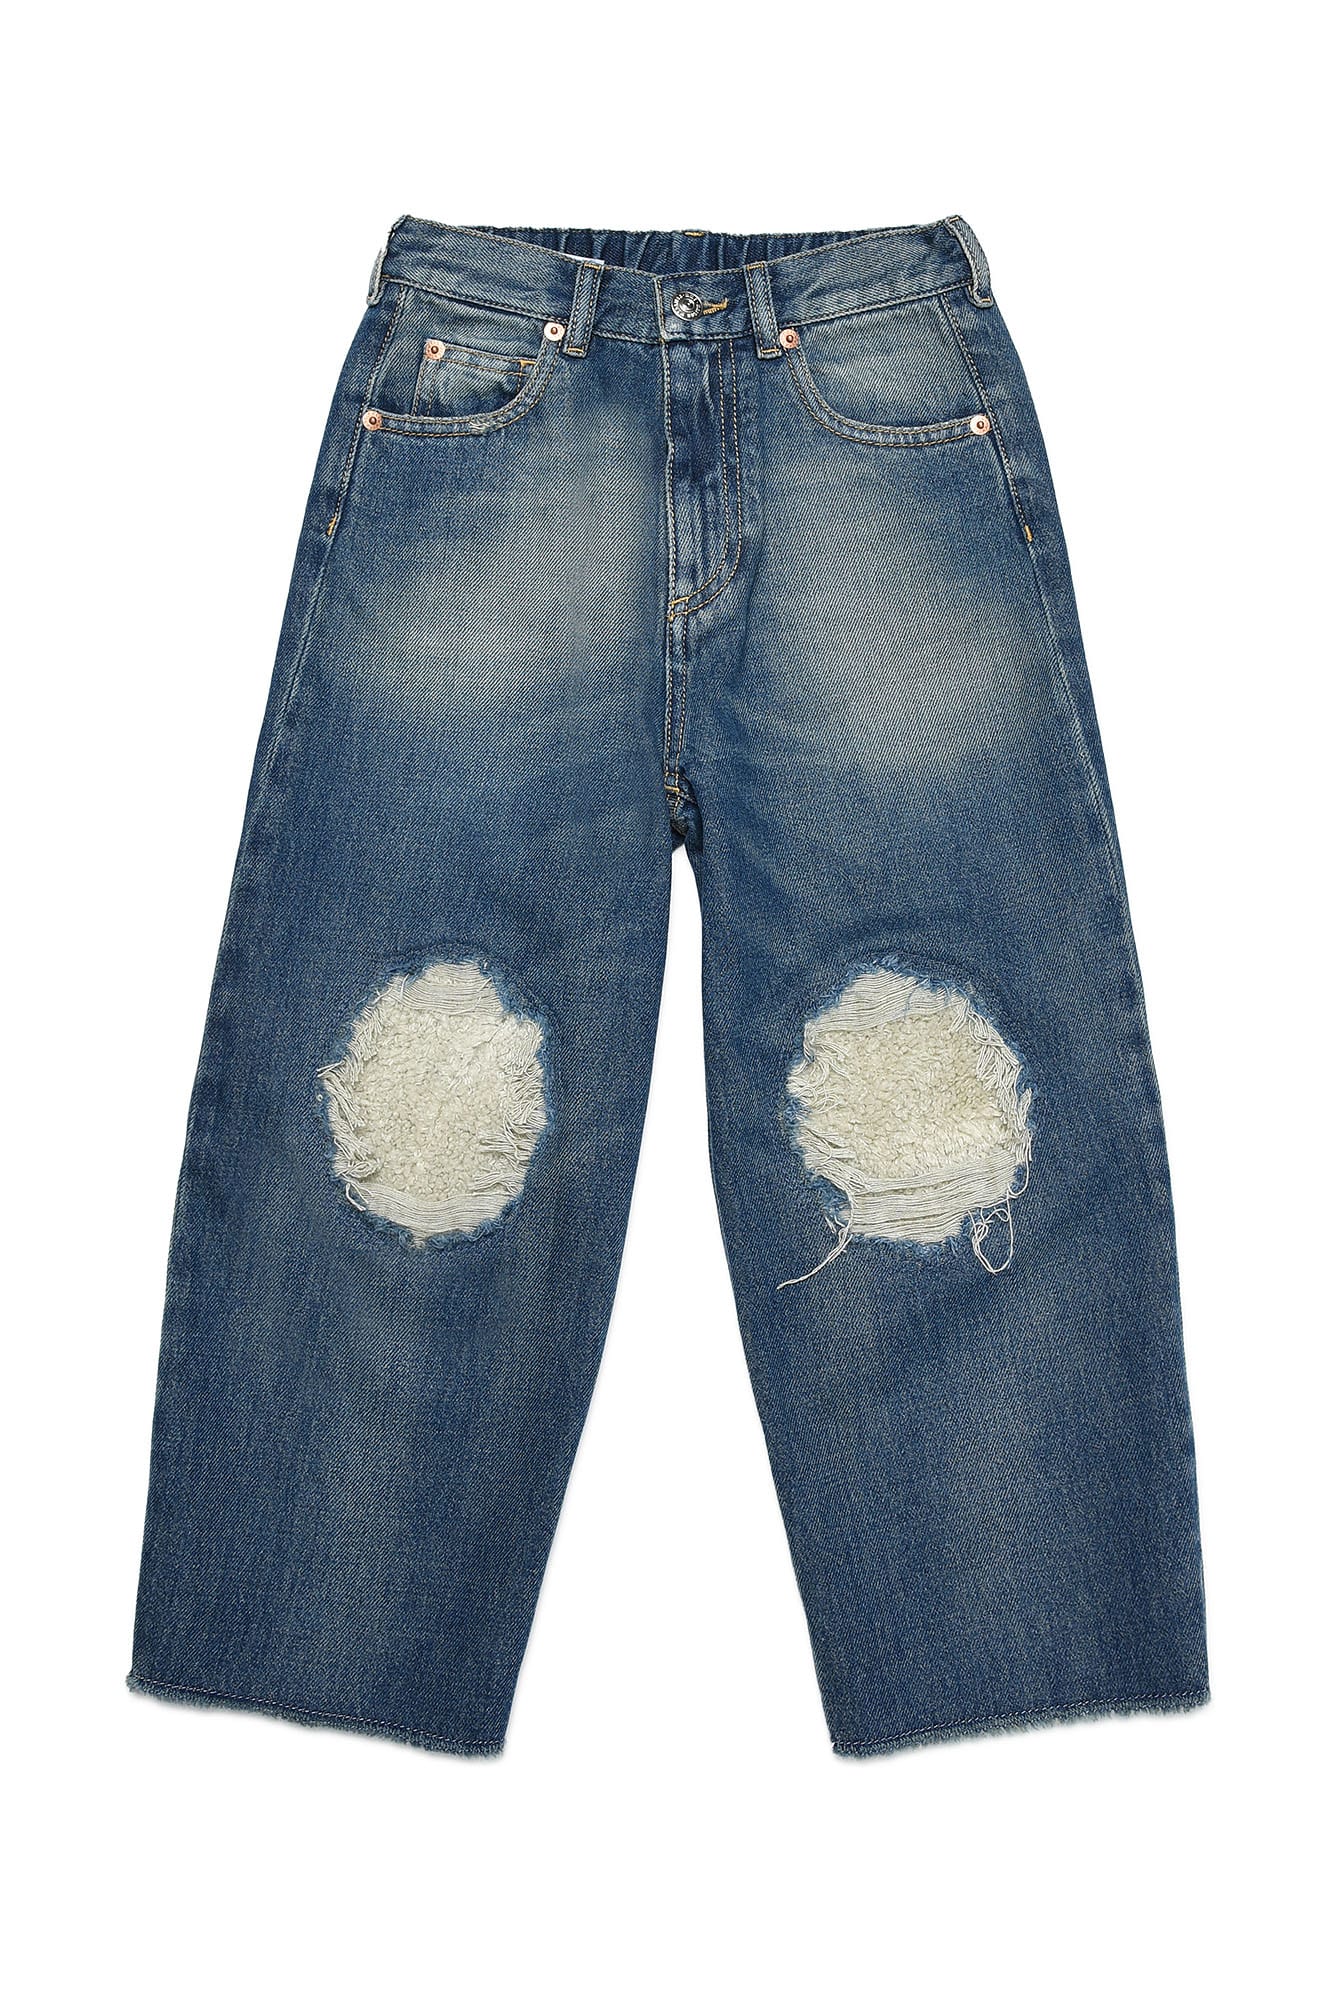 MM6 MAISON MARGIELA JEANS WITH APPLICATION